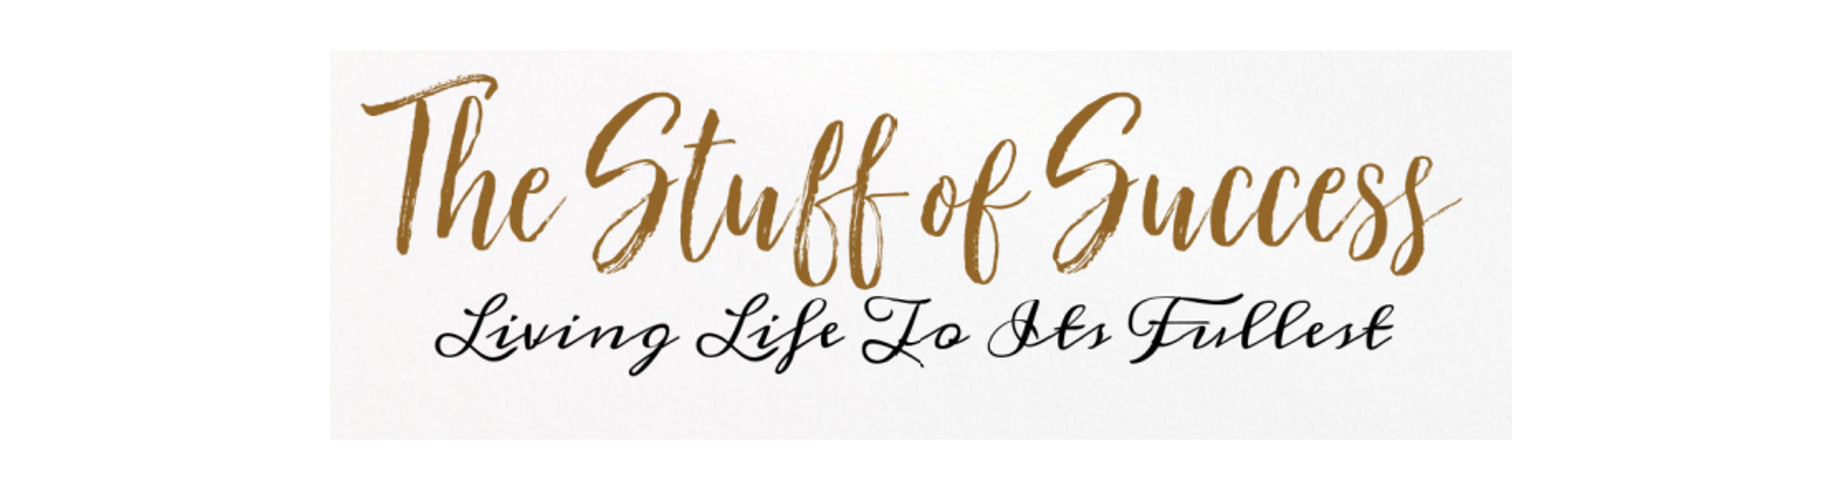 The Stuff of Success - Mother's Day Gift Guide